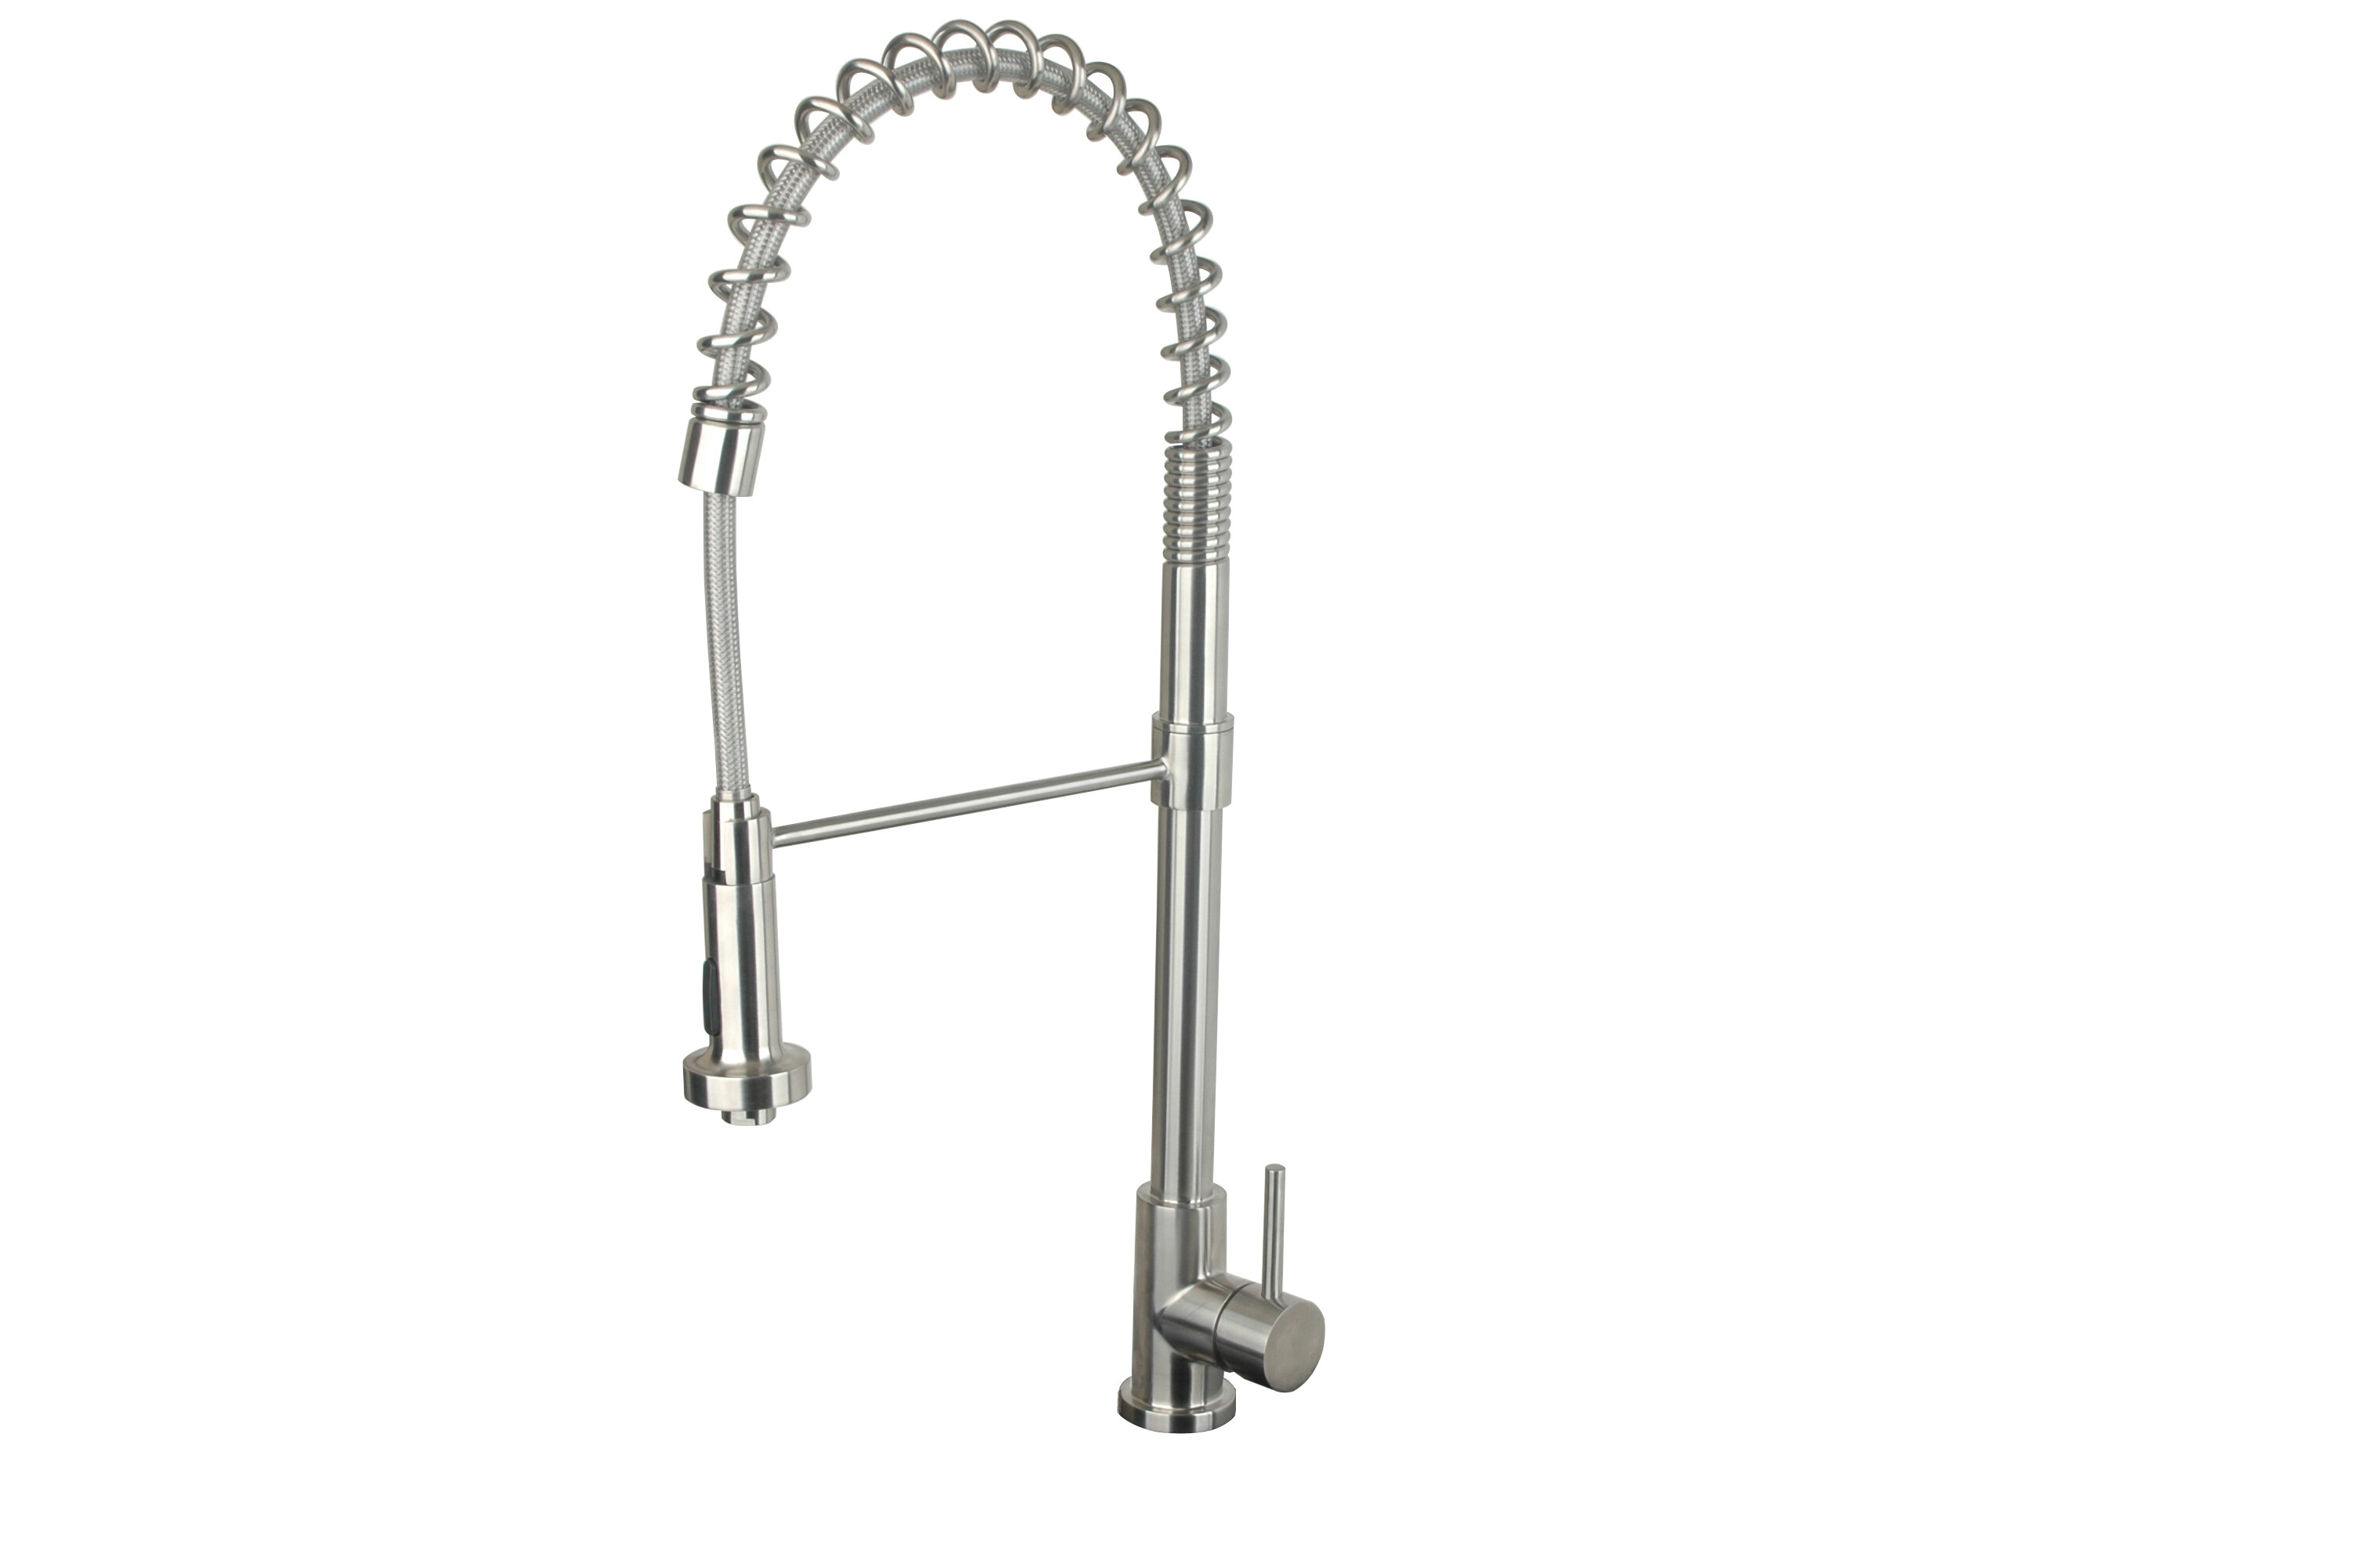 Superior Quality Sus 304 316 Stainless Steel Pull Down Lead Free Kitchen Faucet Water Tap